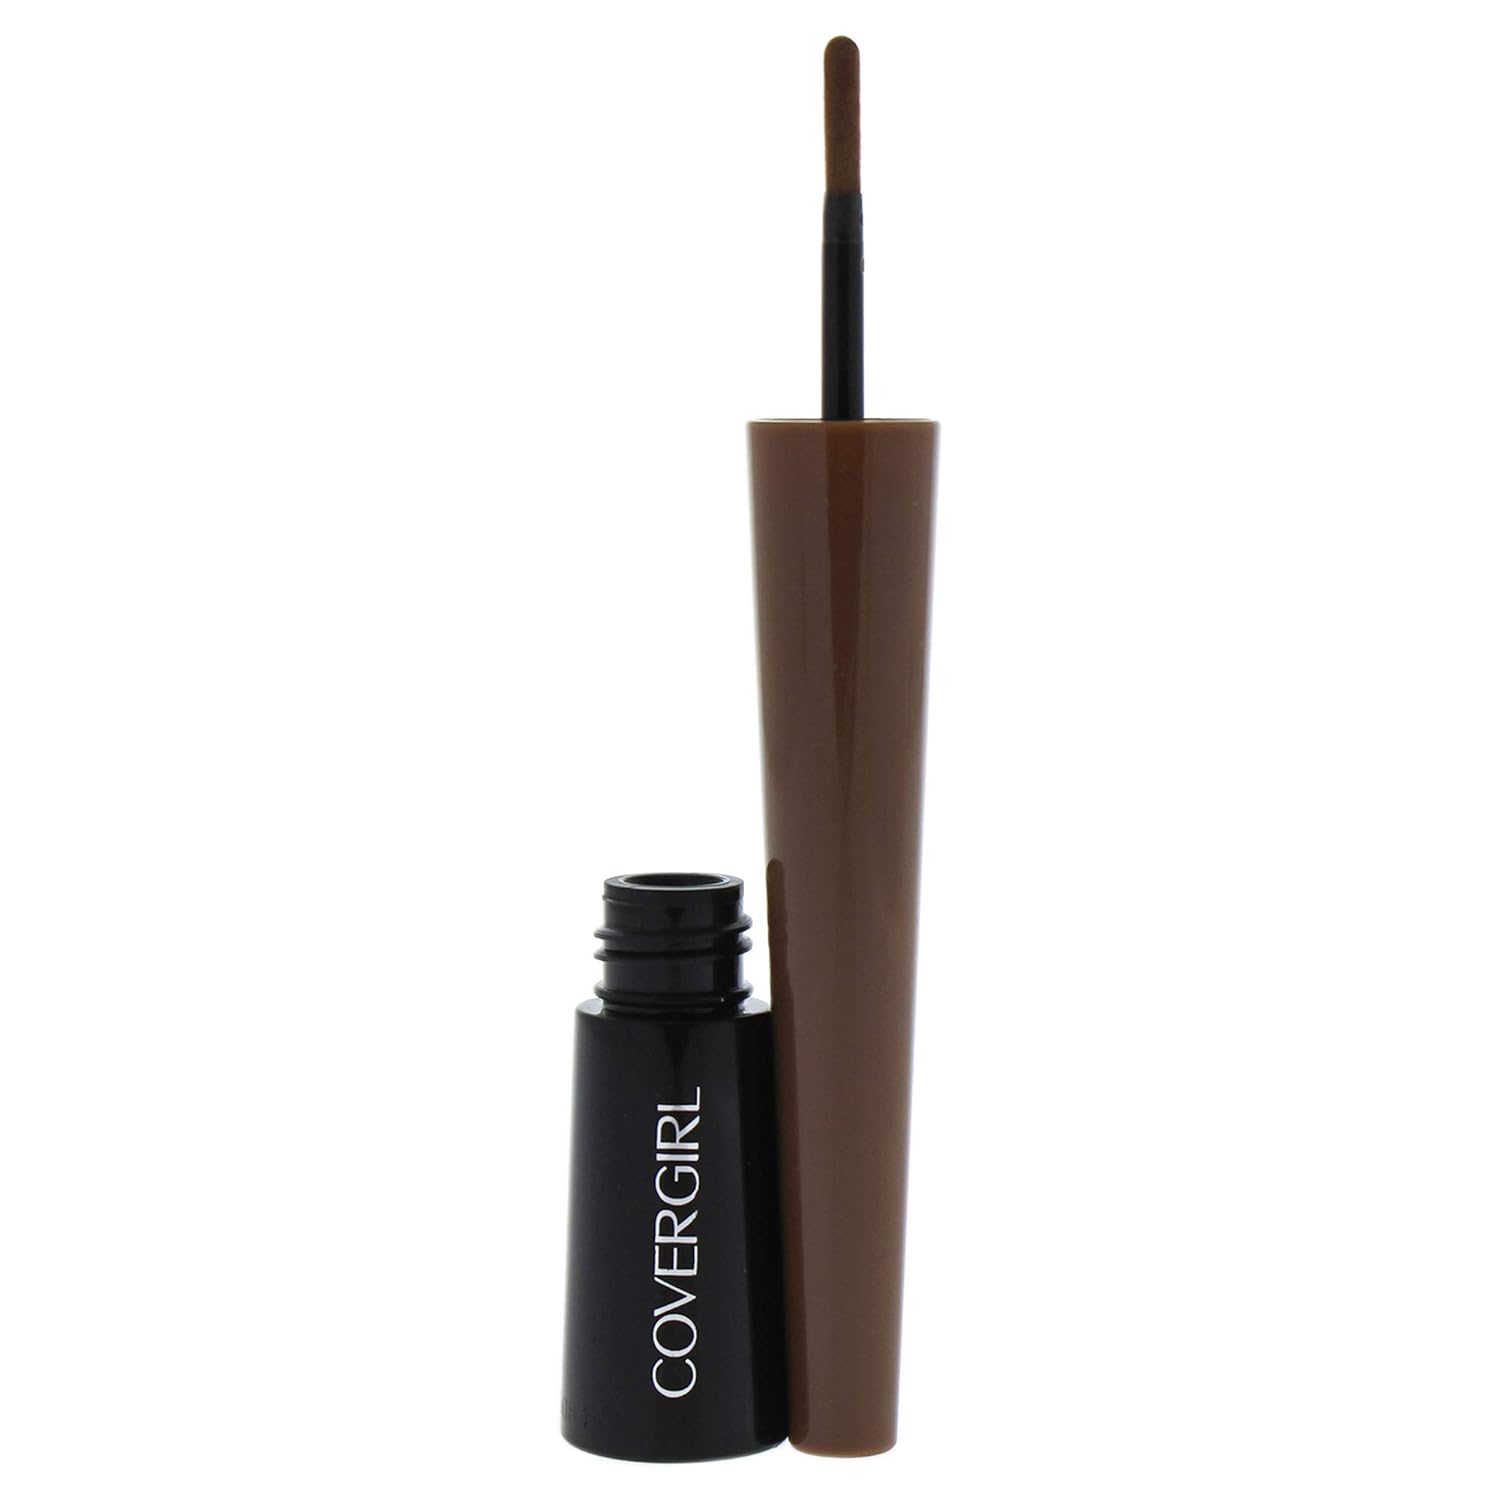 COVERGIRL Bombshell POW-der Brow & Liner Eyebrow Powder Blonde 815, .24 , Old Version (packaging may vary)